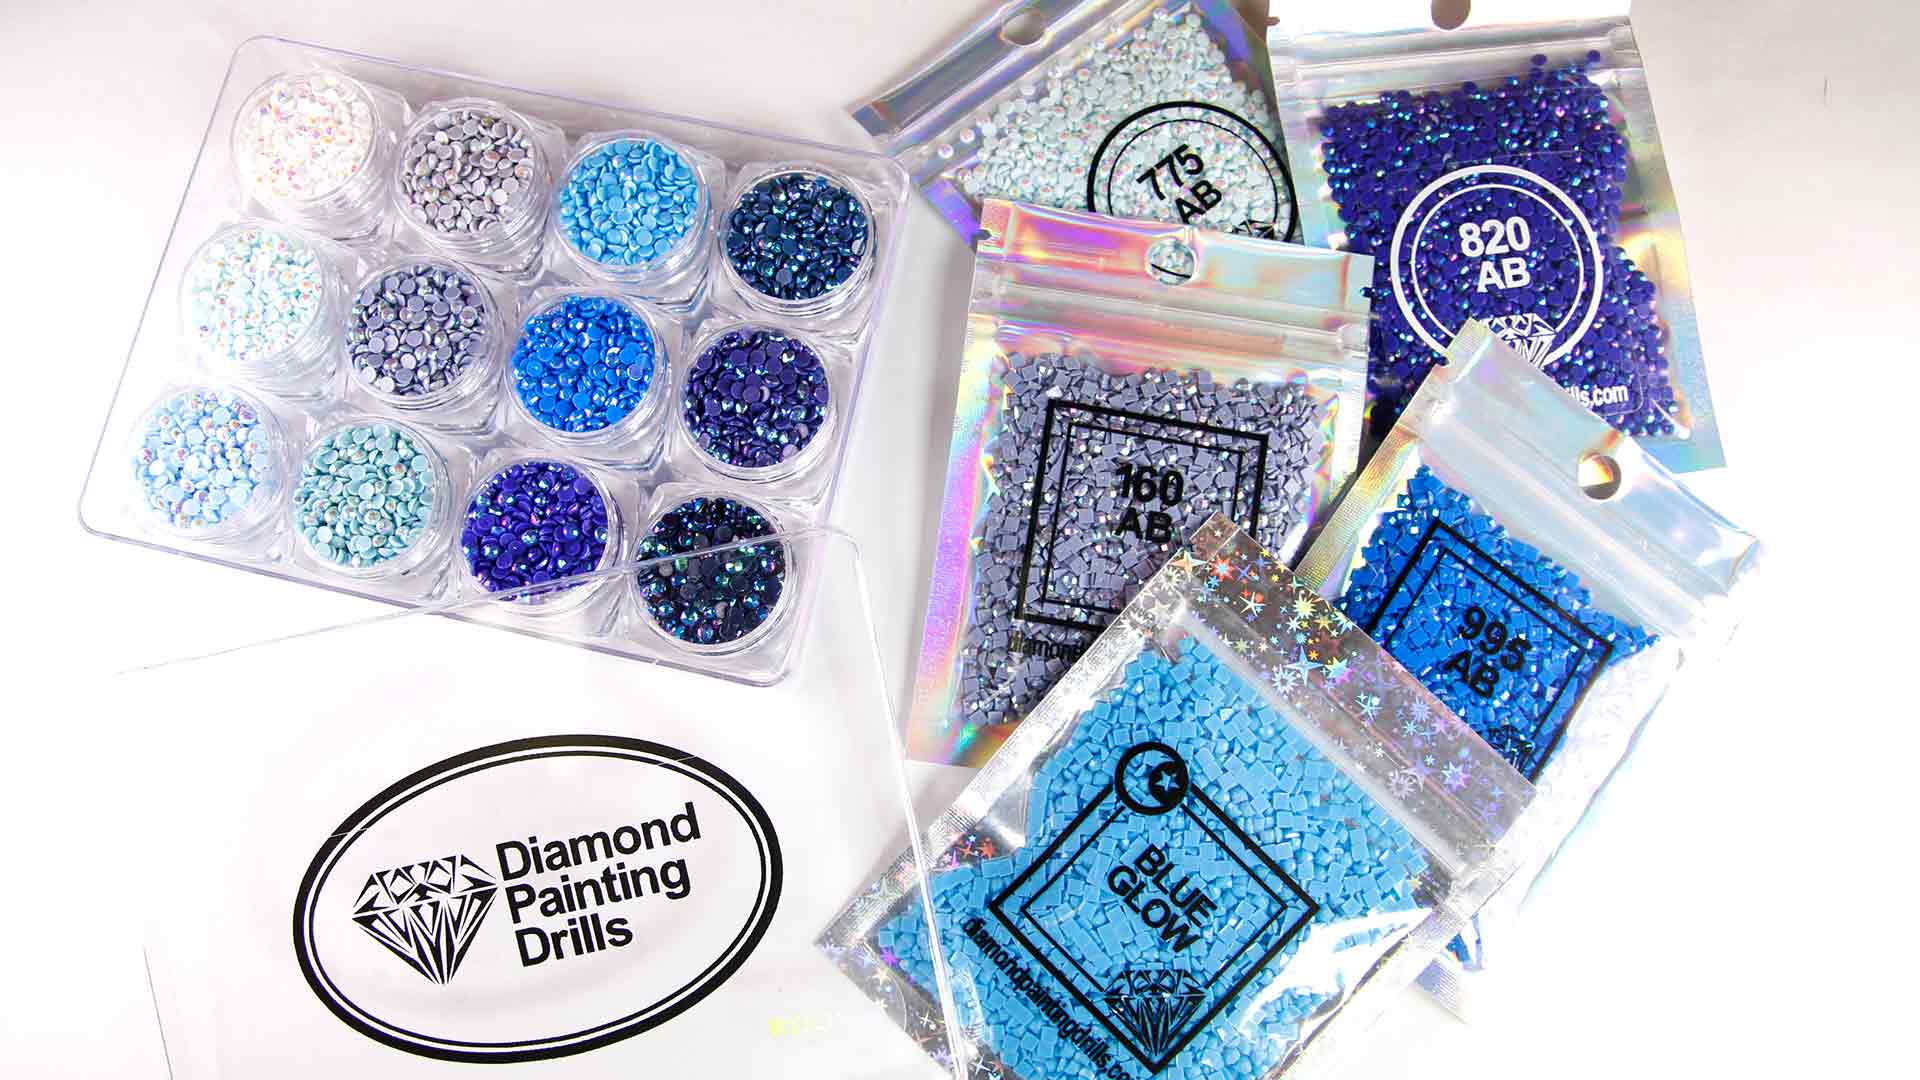 Stand By Me Diamond Painting Kit (Full Drill) – Paint With Diamonds